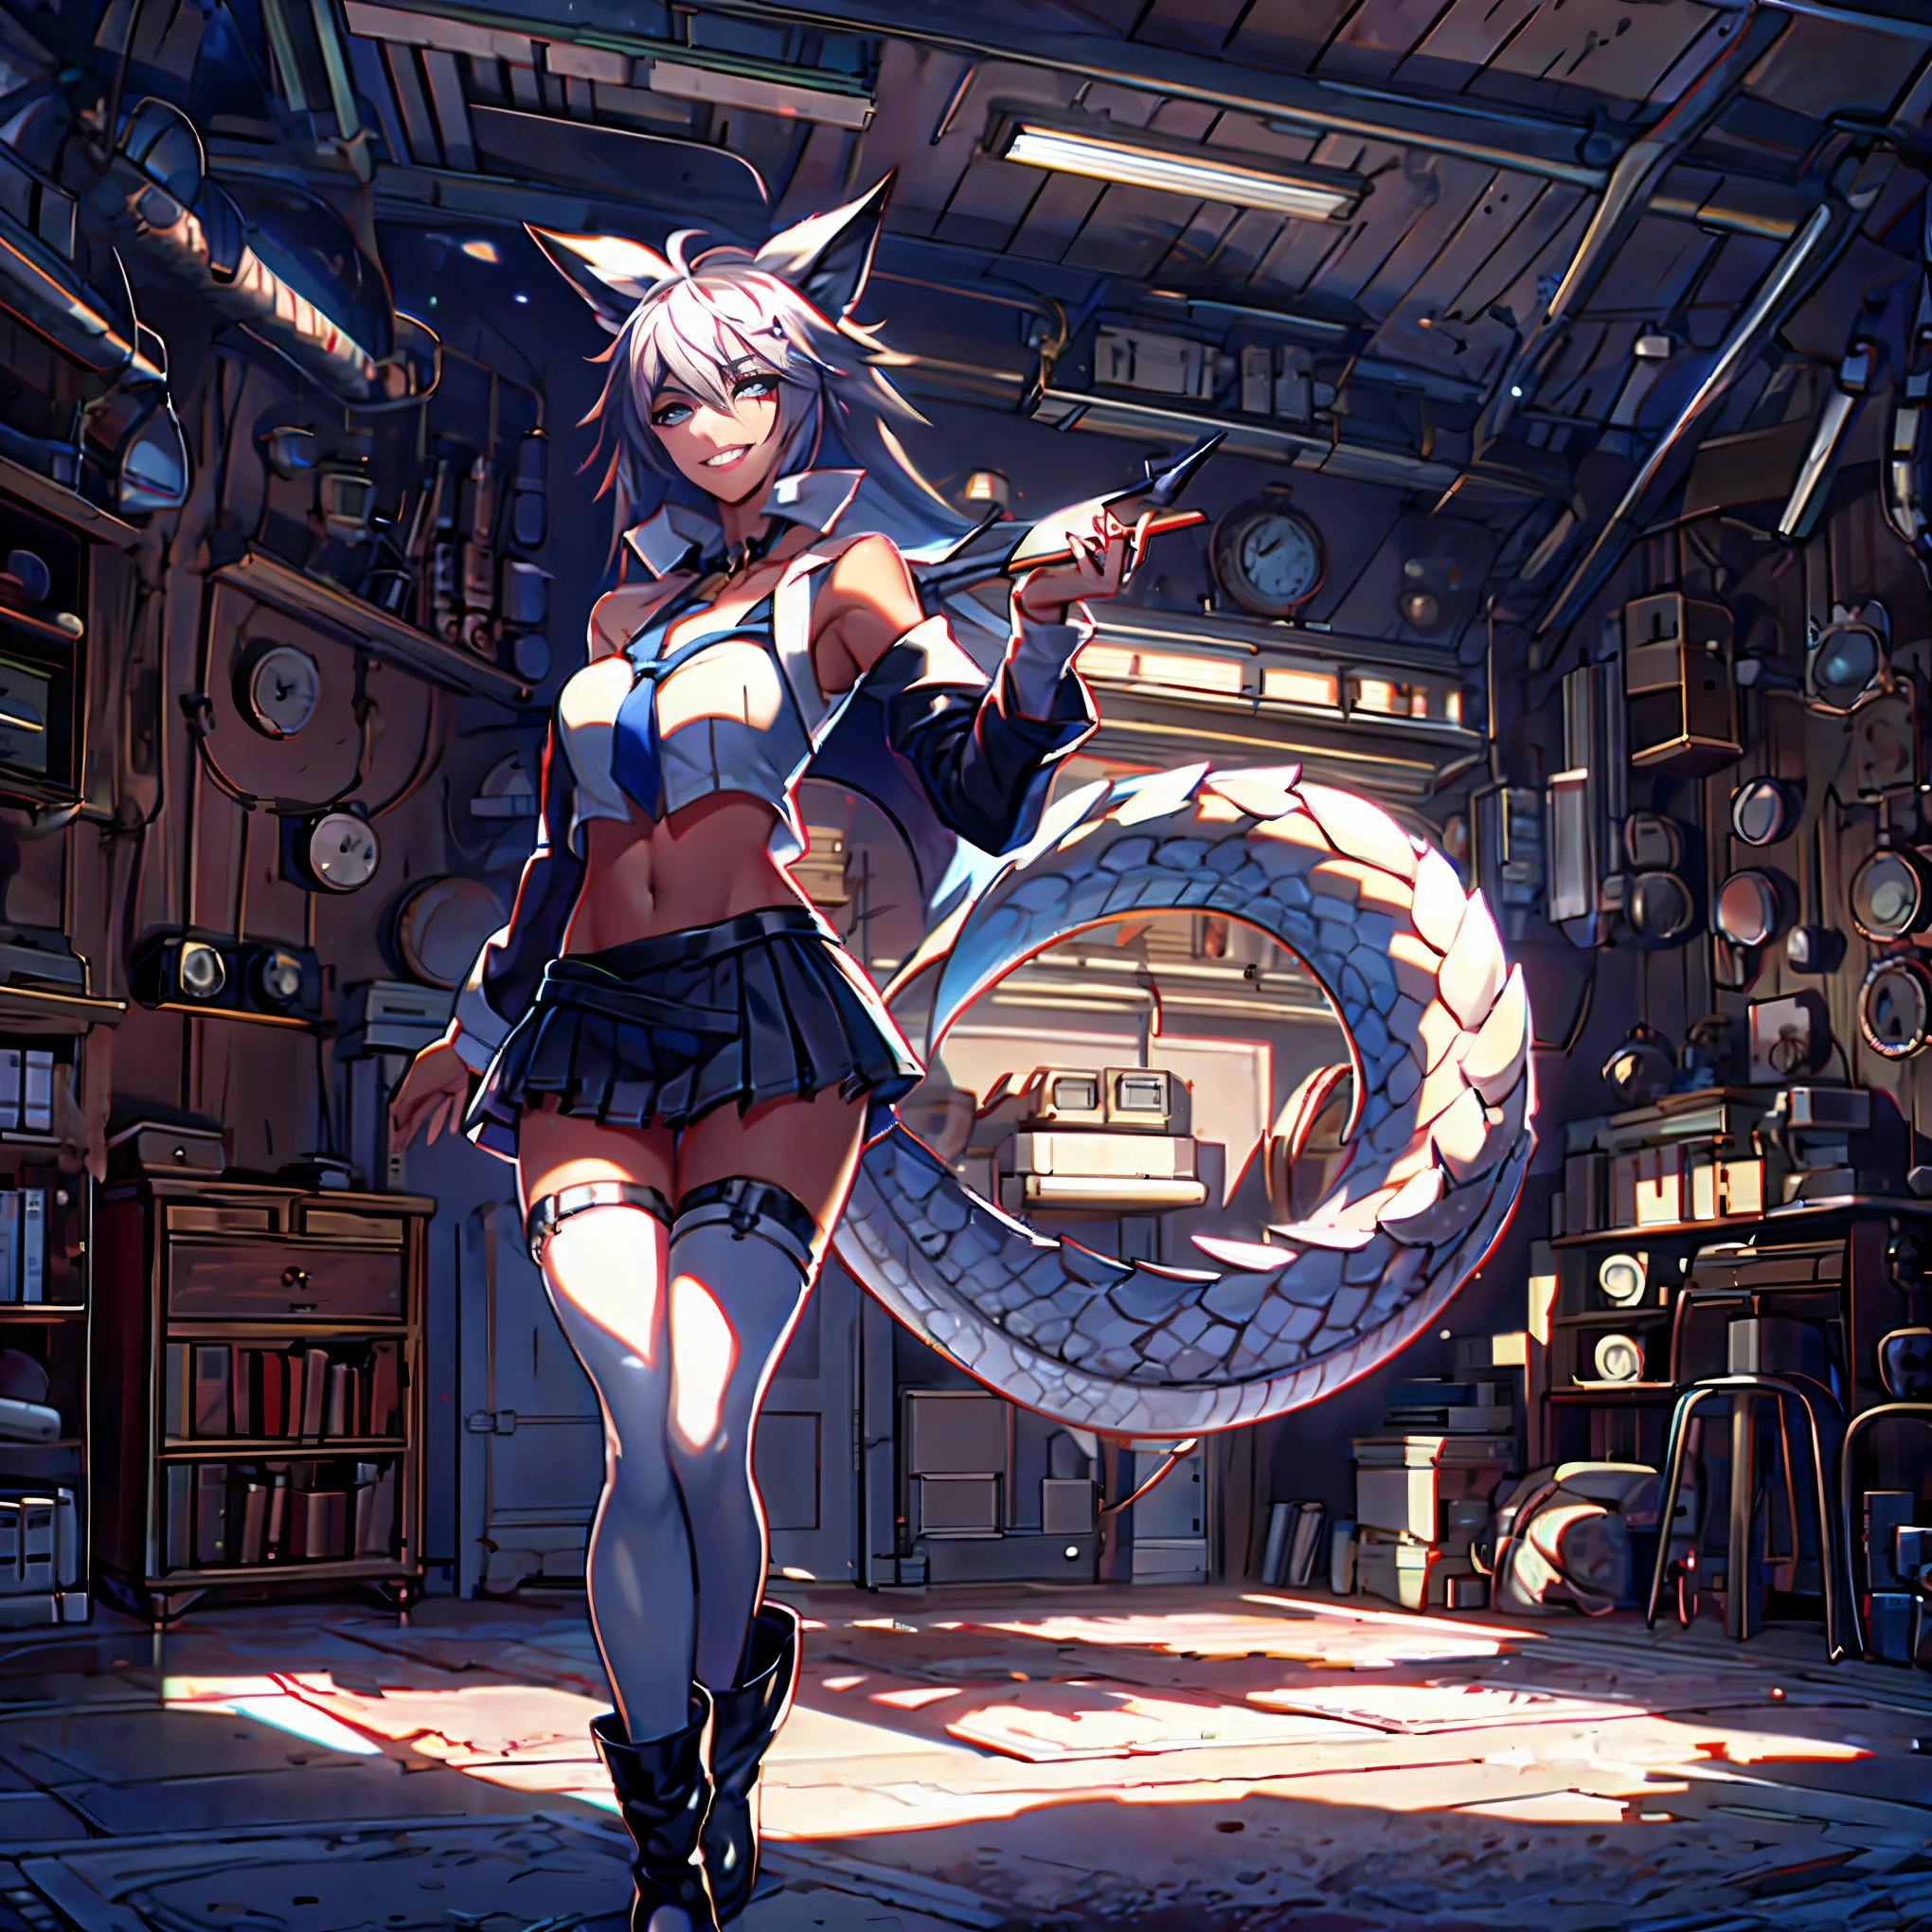 8k, resolution, high quality, high resolution, best quality, extremally detailed, best resolution, absurd resolution, ray tracing, high detailed, masterpiece, extremely detailed,shoulder length white hair, female,2 white wolf ears, teenage girl, slim body,white scale dragon tail, military boots,black leggings, navel blue school skirt, sailer shirt,black bullet proof vest,white jacket, medium size chest, detailed blue eyes, detailed beautiful face,solo female,1 dragon tail, detailed eyes, tomboyish, dragon tail, white scales, Norma nose, normal eyes, detailed nose, detailed eyes